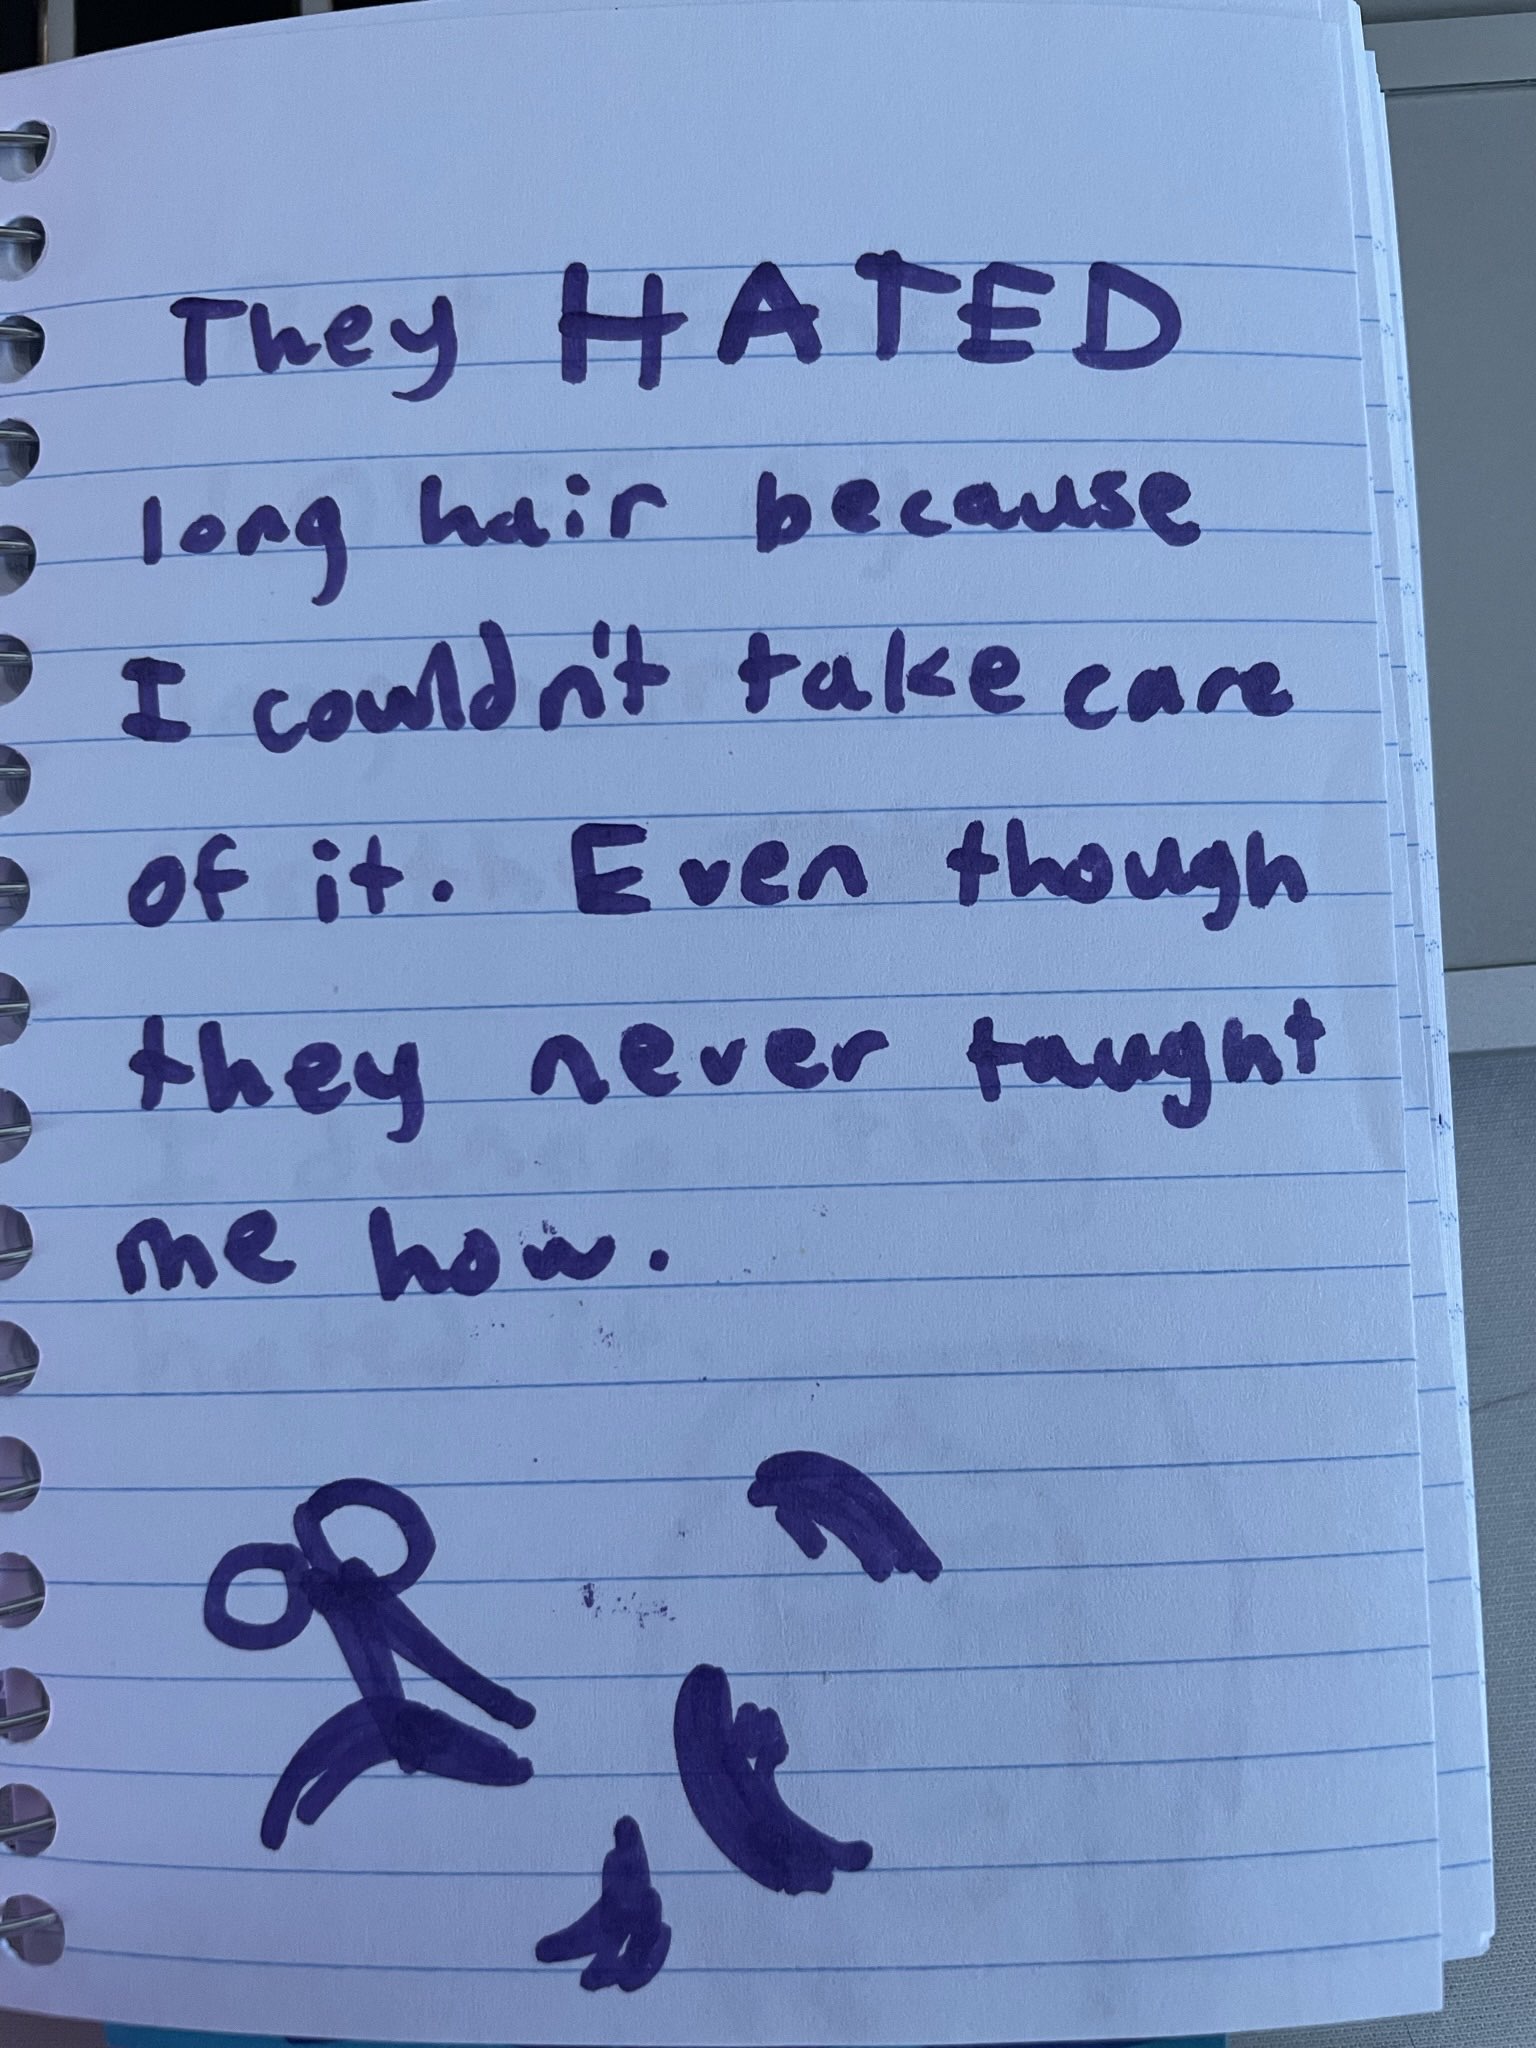  they Hated long hair because I couldn't take care of it, despite them never telling me how. there is a drawing of scissors cutting several chunks of hair.